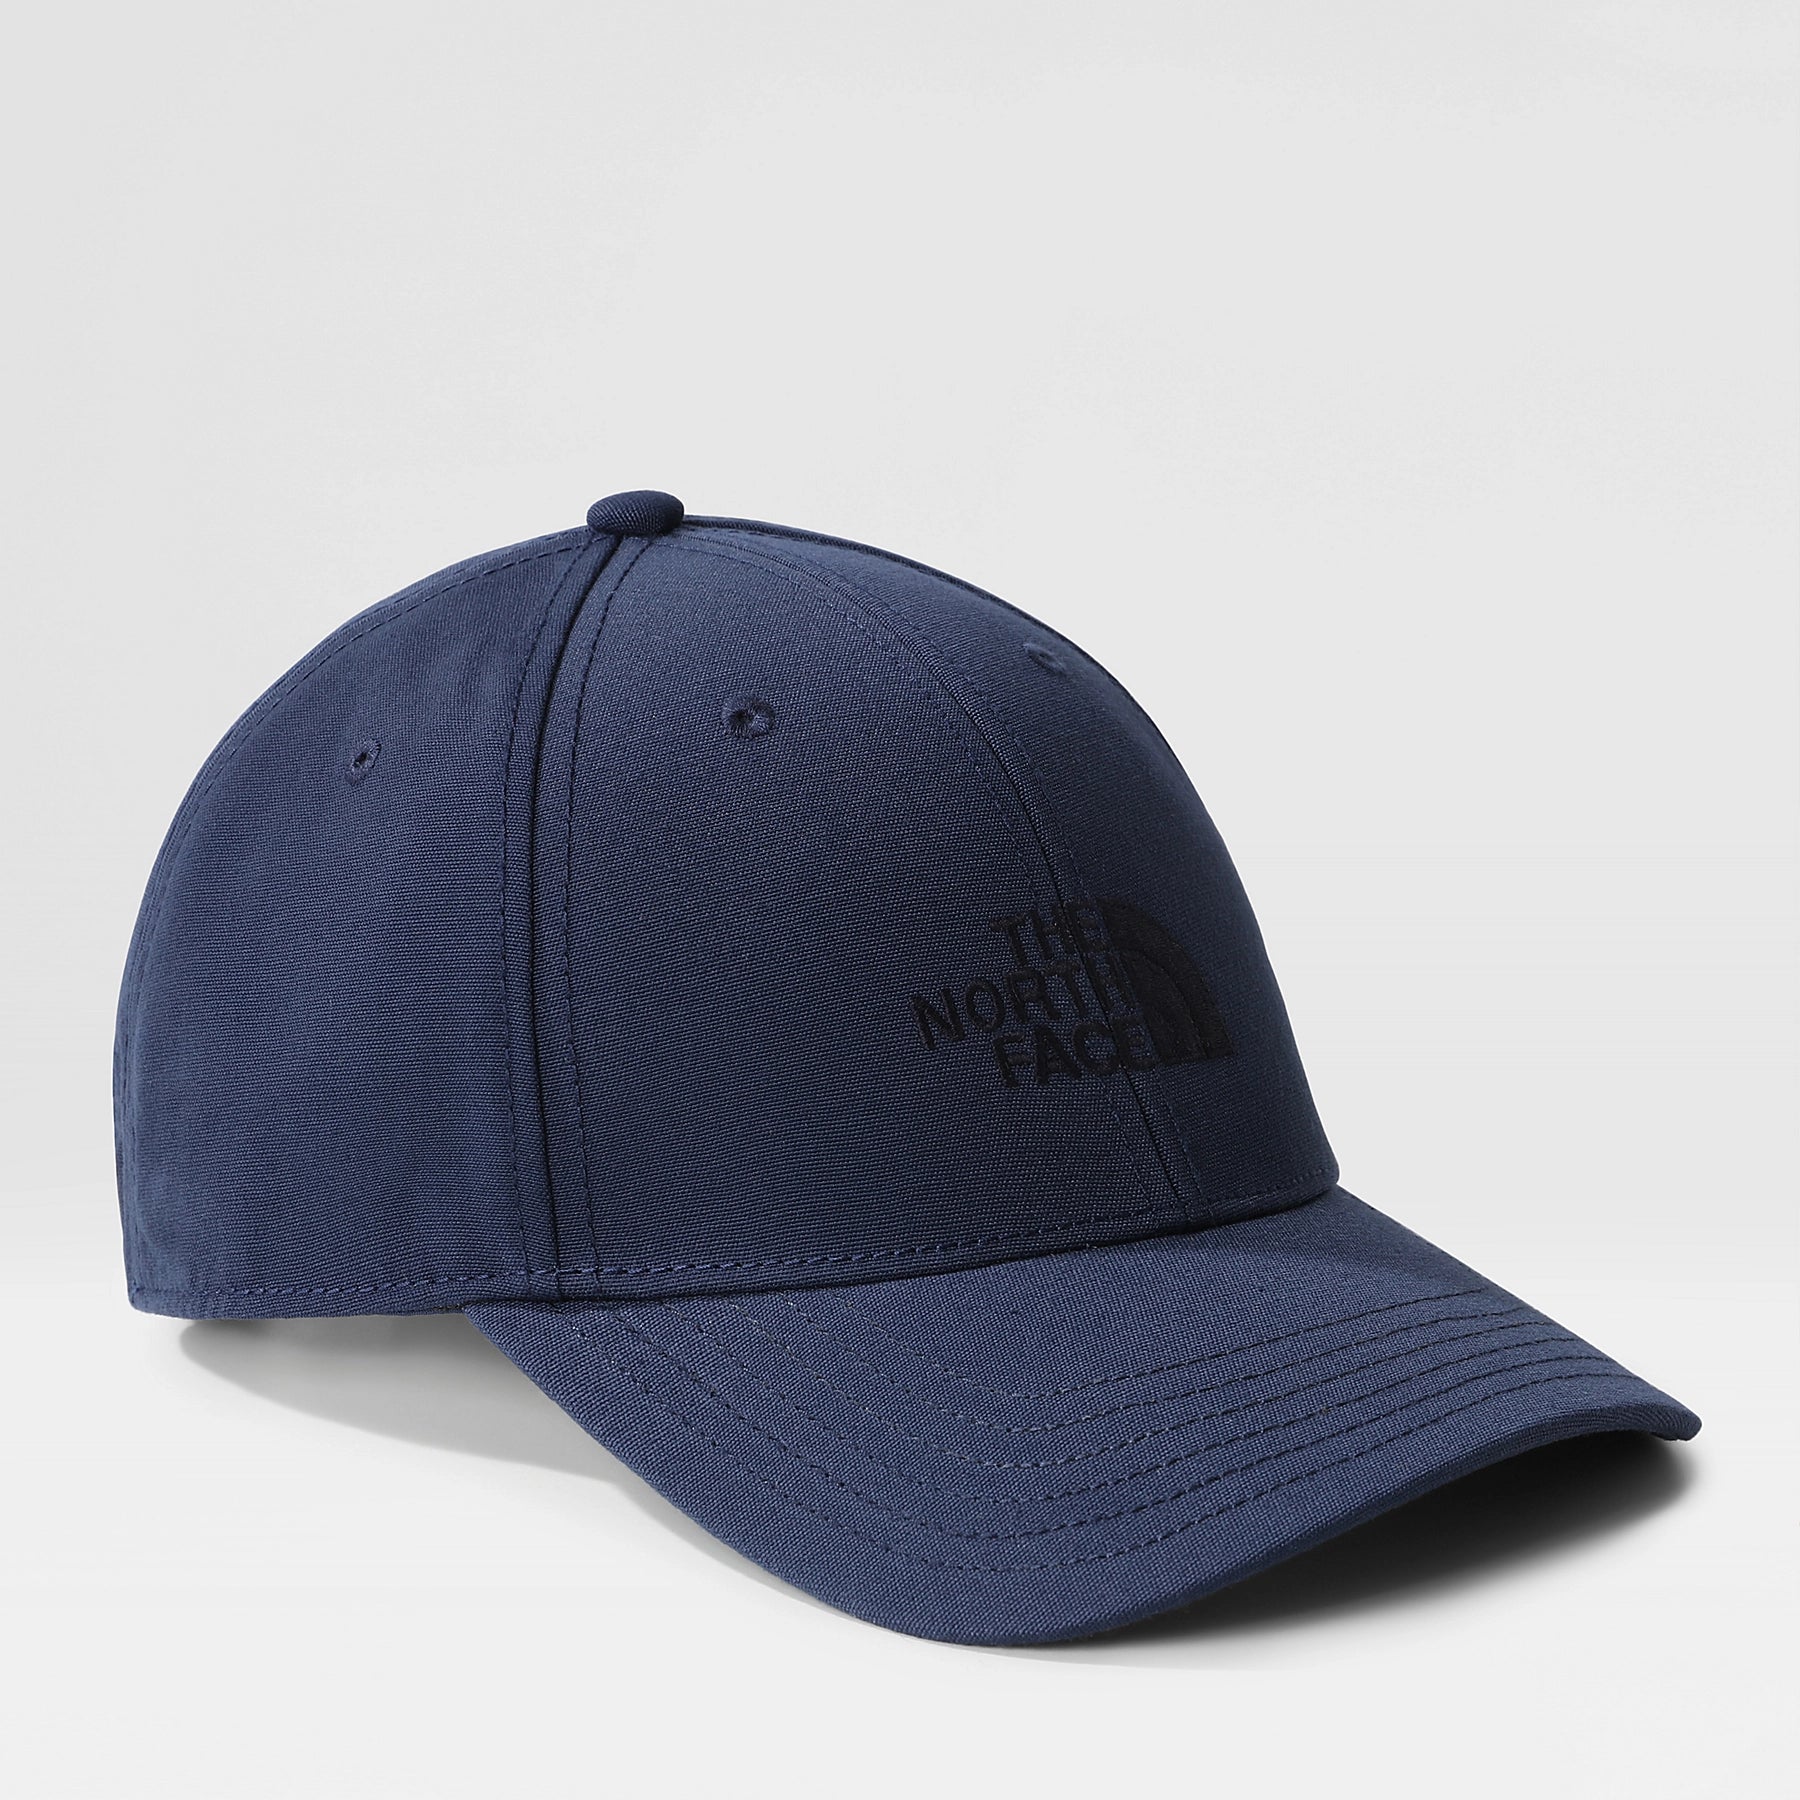 North Face Recycled 66 Classic Cap